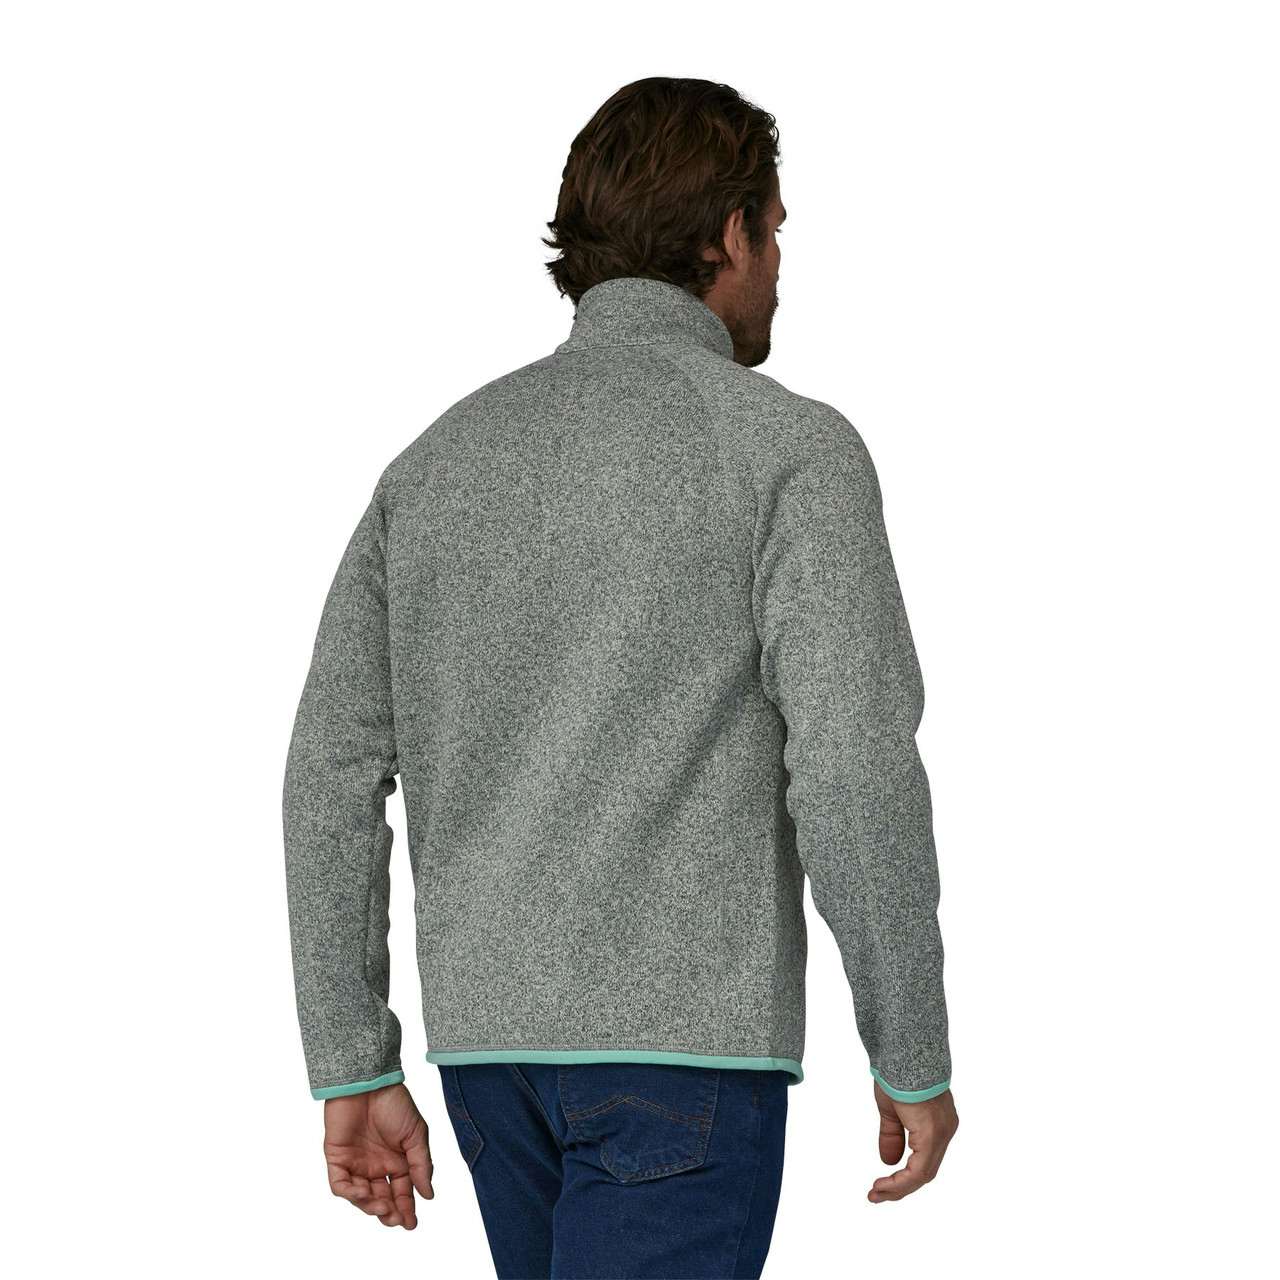 Better Sweater Quarter Zip Stonewash/Early Teal